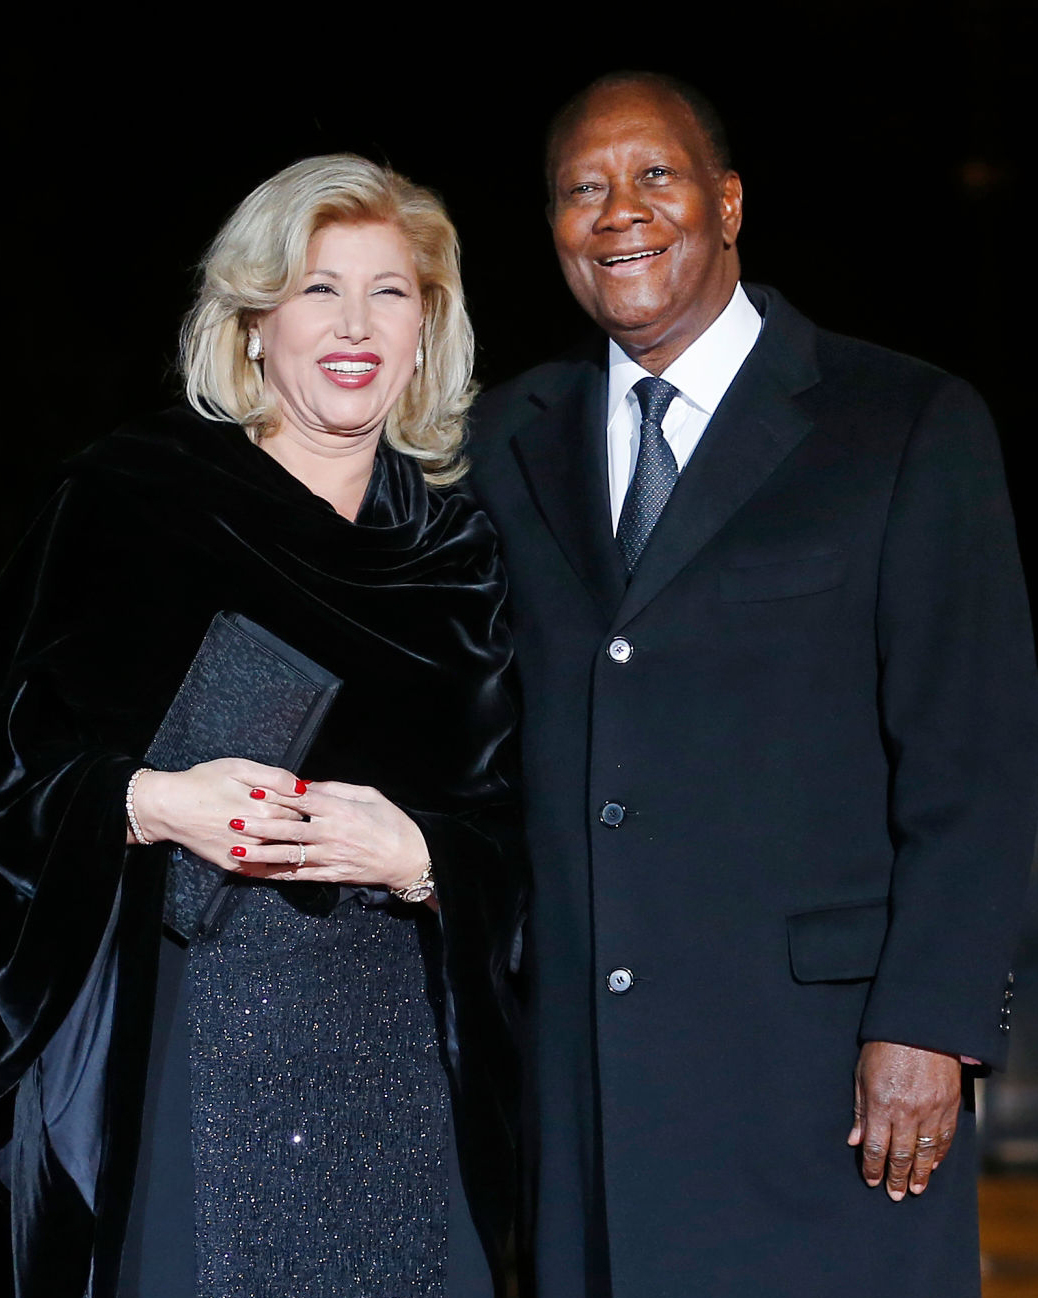 PARIS, FRANCE - NOVEMBER 10: Ivory Coast's President Alassane Ouattara and his wife Dominique Ouattara arrive to attend a dinner hosted by French President Emmanuel Macron at the Orsay museum on November 10, 2018 in Paris, France. Heads of State from around the world meet in Paris to commemorate the end of the first World War (WWI) during a international ceremony of the Armistice Centenary of 1918 at the Arc de Triomphe on November 11, 2018. (Photo by Chesnot/Getty Images)